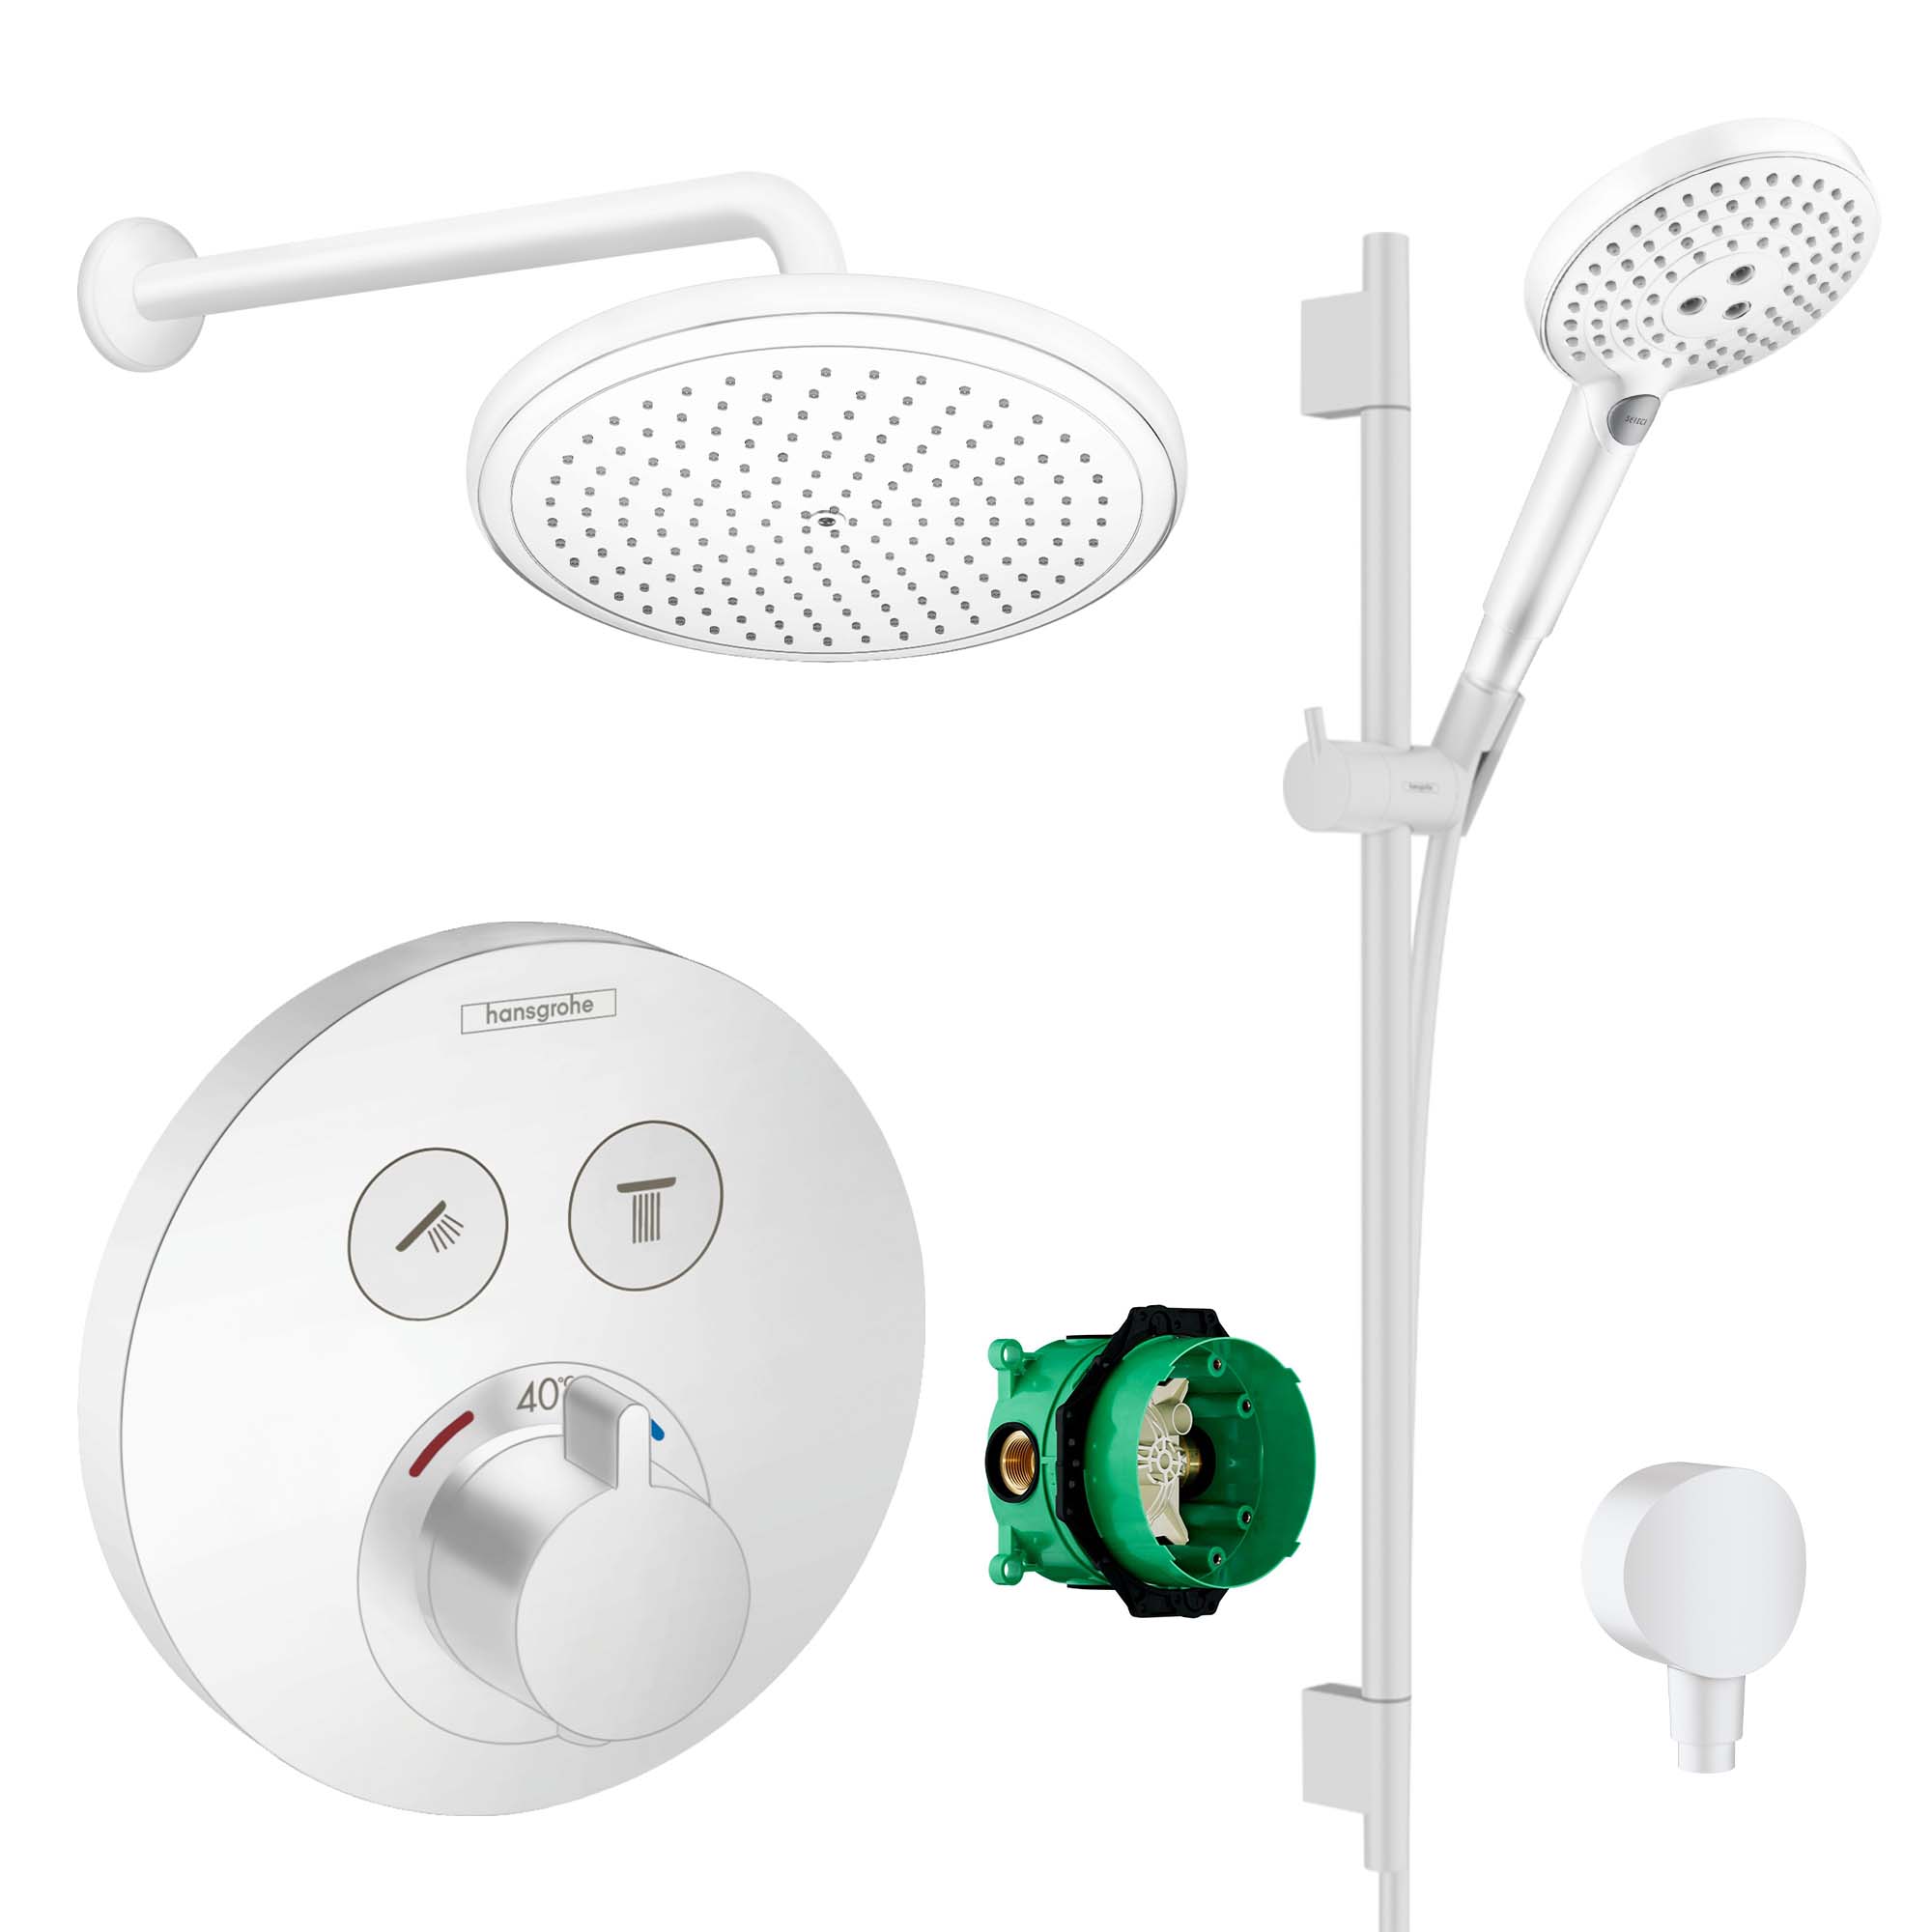 hansgrohe round select 2 outlet push thermostatic valve with croma 280 overhead shower and slide rail kit matt white